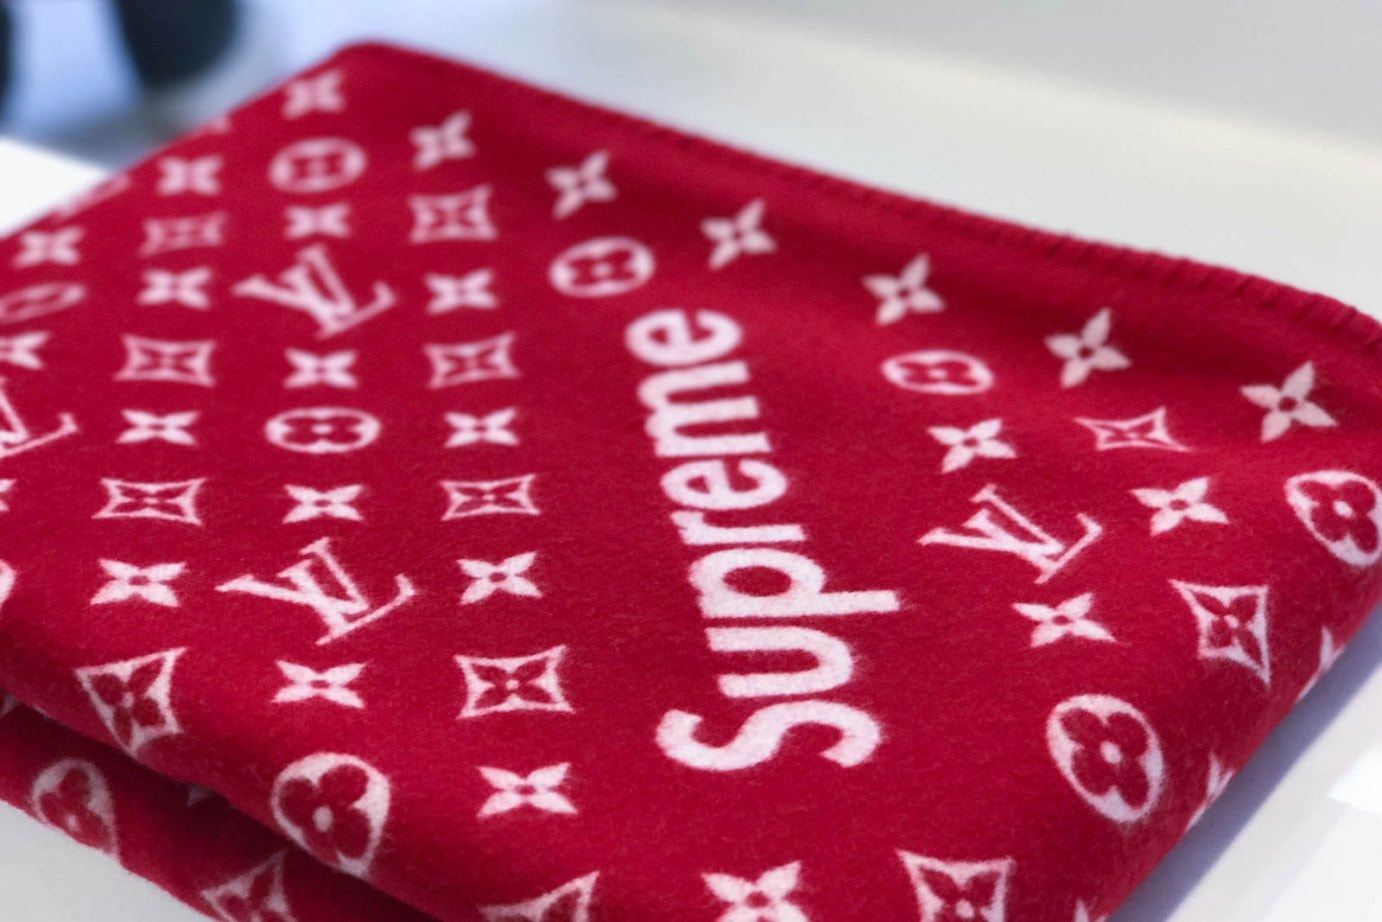 Supreme x Louis Vuitton 2017 Fall/Winter Collection Showroom Closer Look